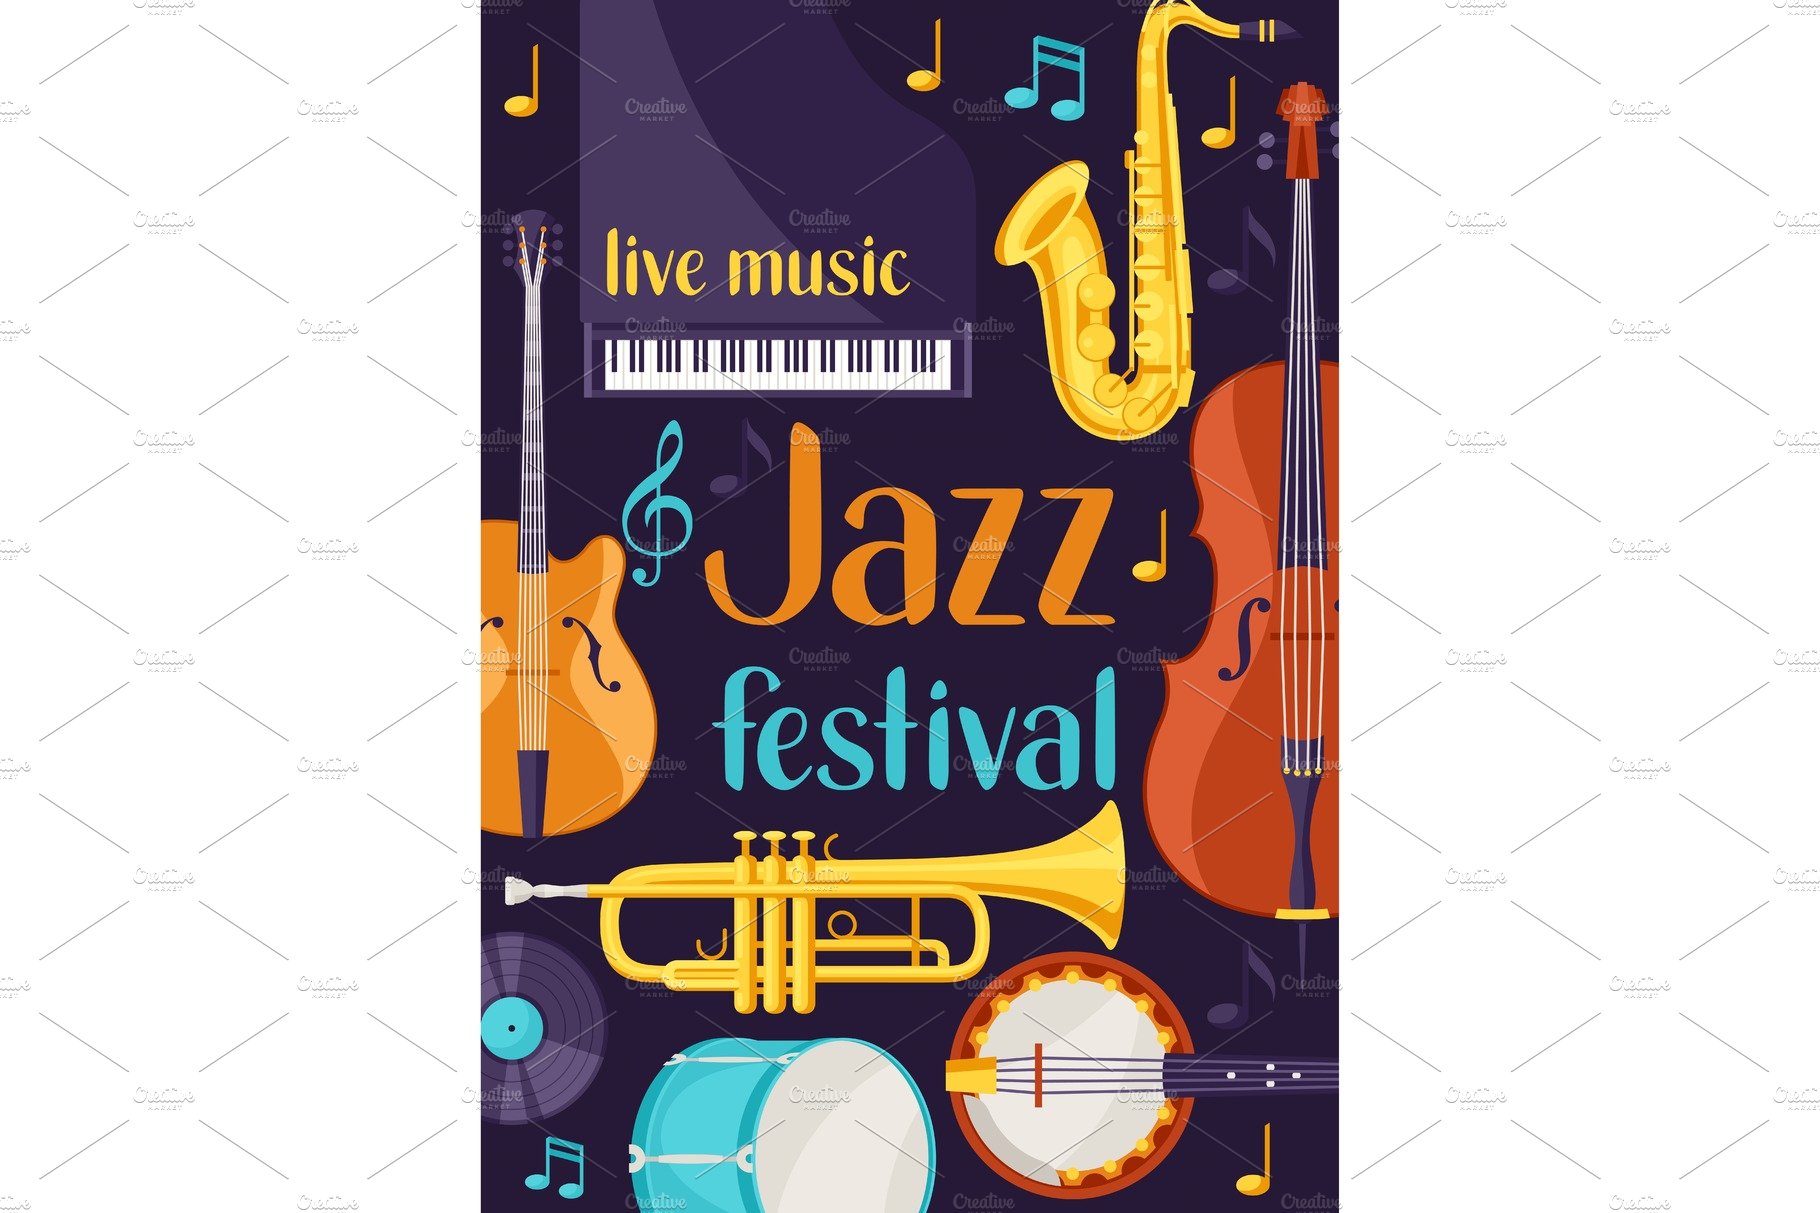 Jazz festival live music retro poster with musical instruments cover image.